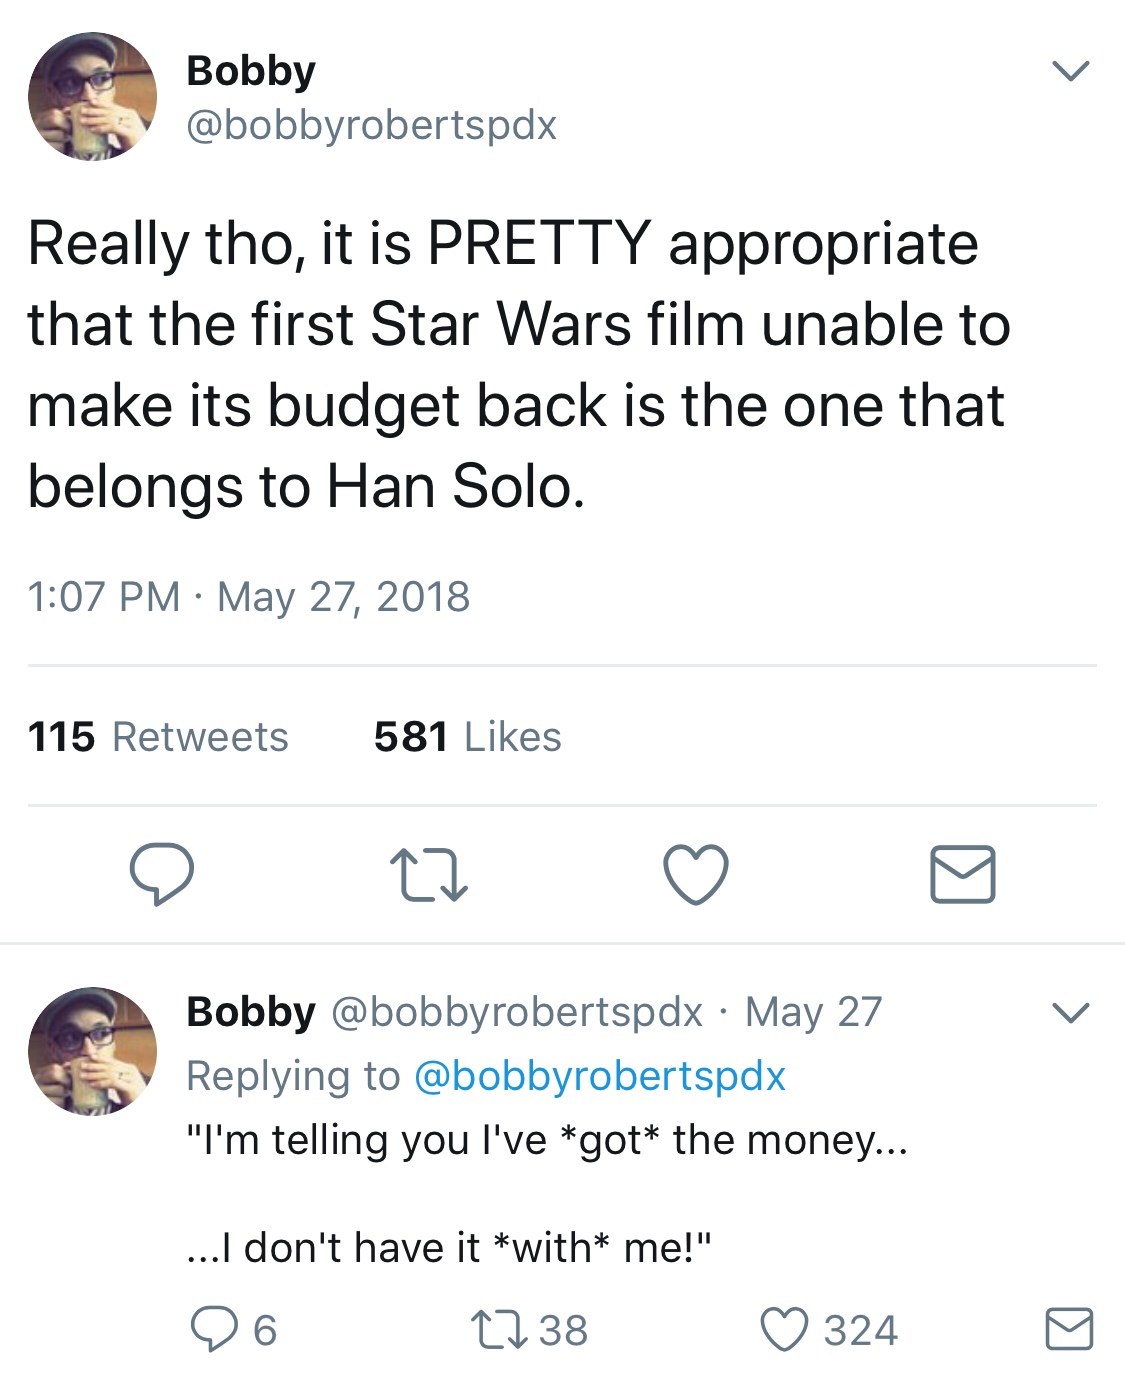 screenshot - Bobby Really tho, it is Pretty appropriate that the first Star Wars film unable to make its budget back is the one that belongs to Han Solo. 115 581 Bobby May 27 "I'm telling you I've got the money... ...I don't have it with me!" 26 2238 324 